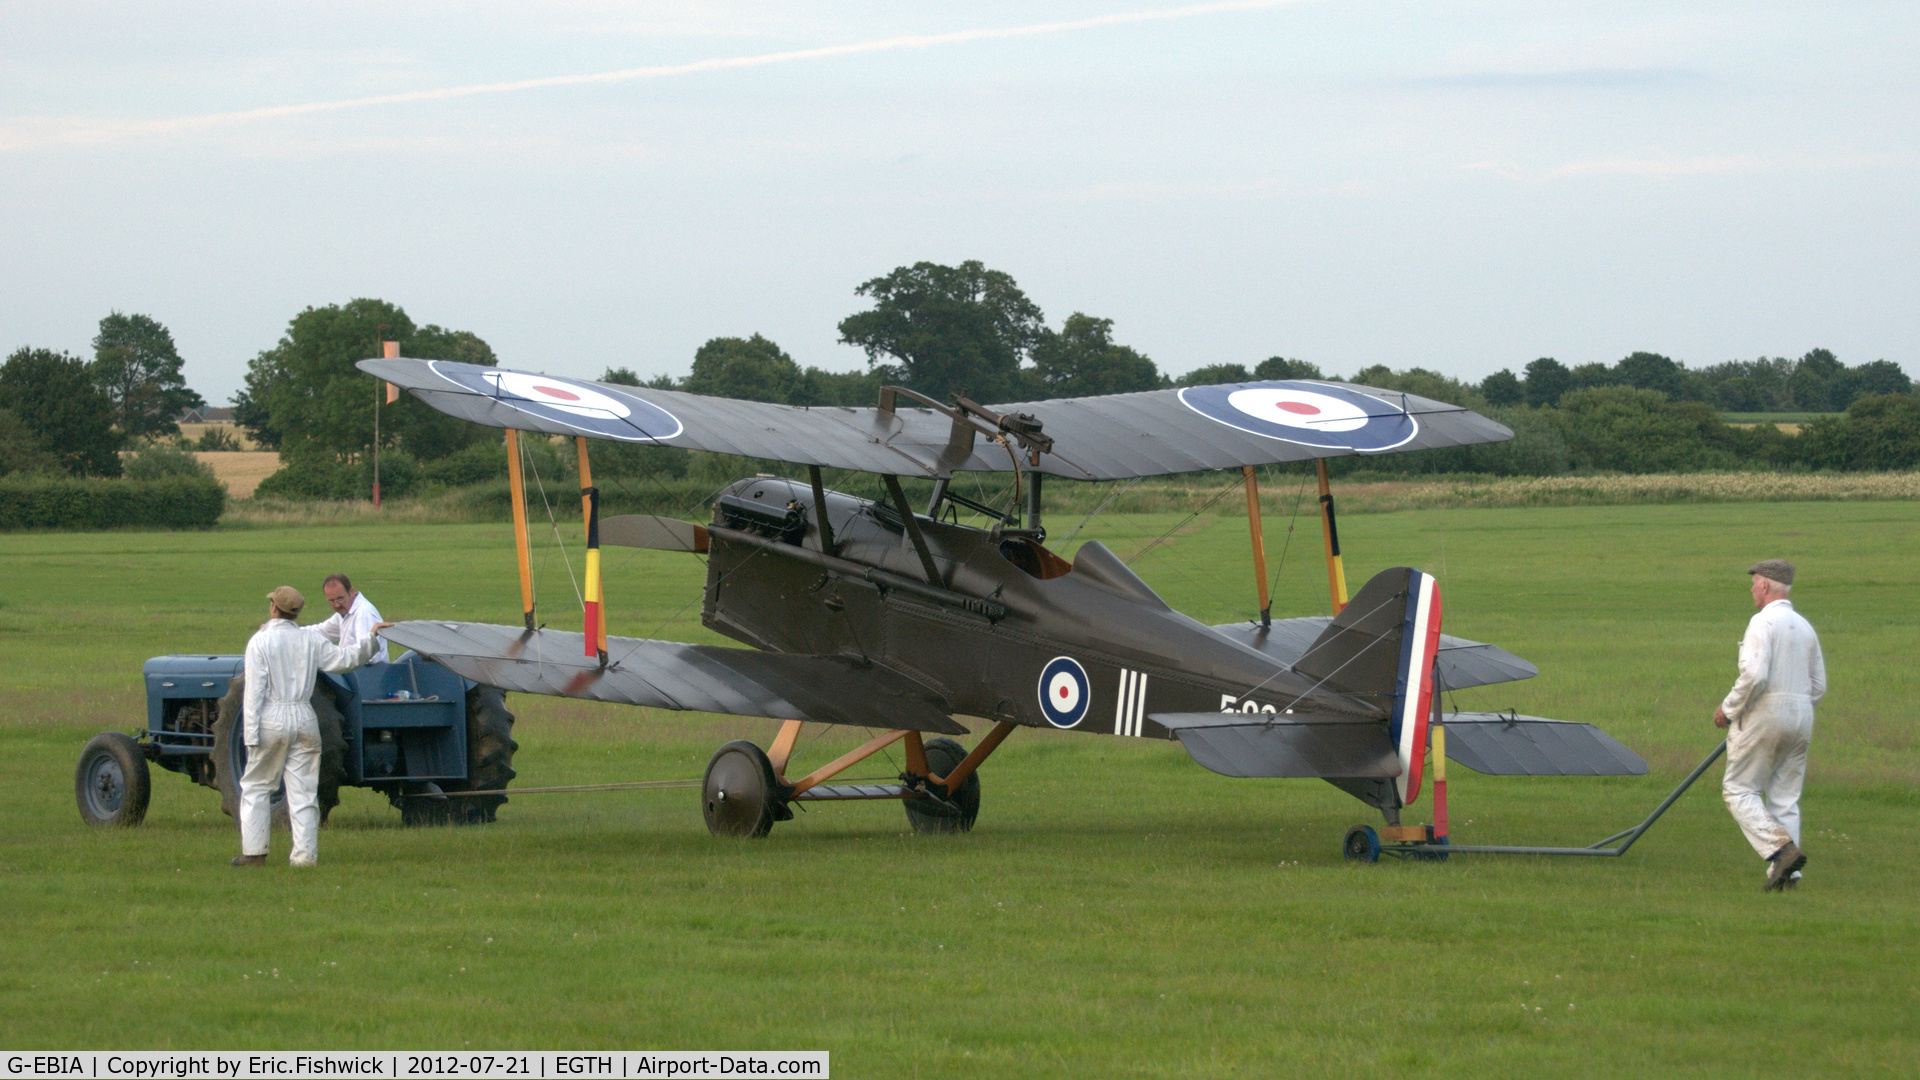 G-EBIA, 1918 Royal Aircraft Factory SE-5A C/N 654/2404, 4. G-EBIA winding down after an energetic display at Shuttleworth Sunset Air Display, July 2012